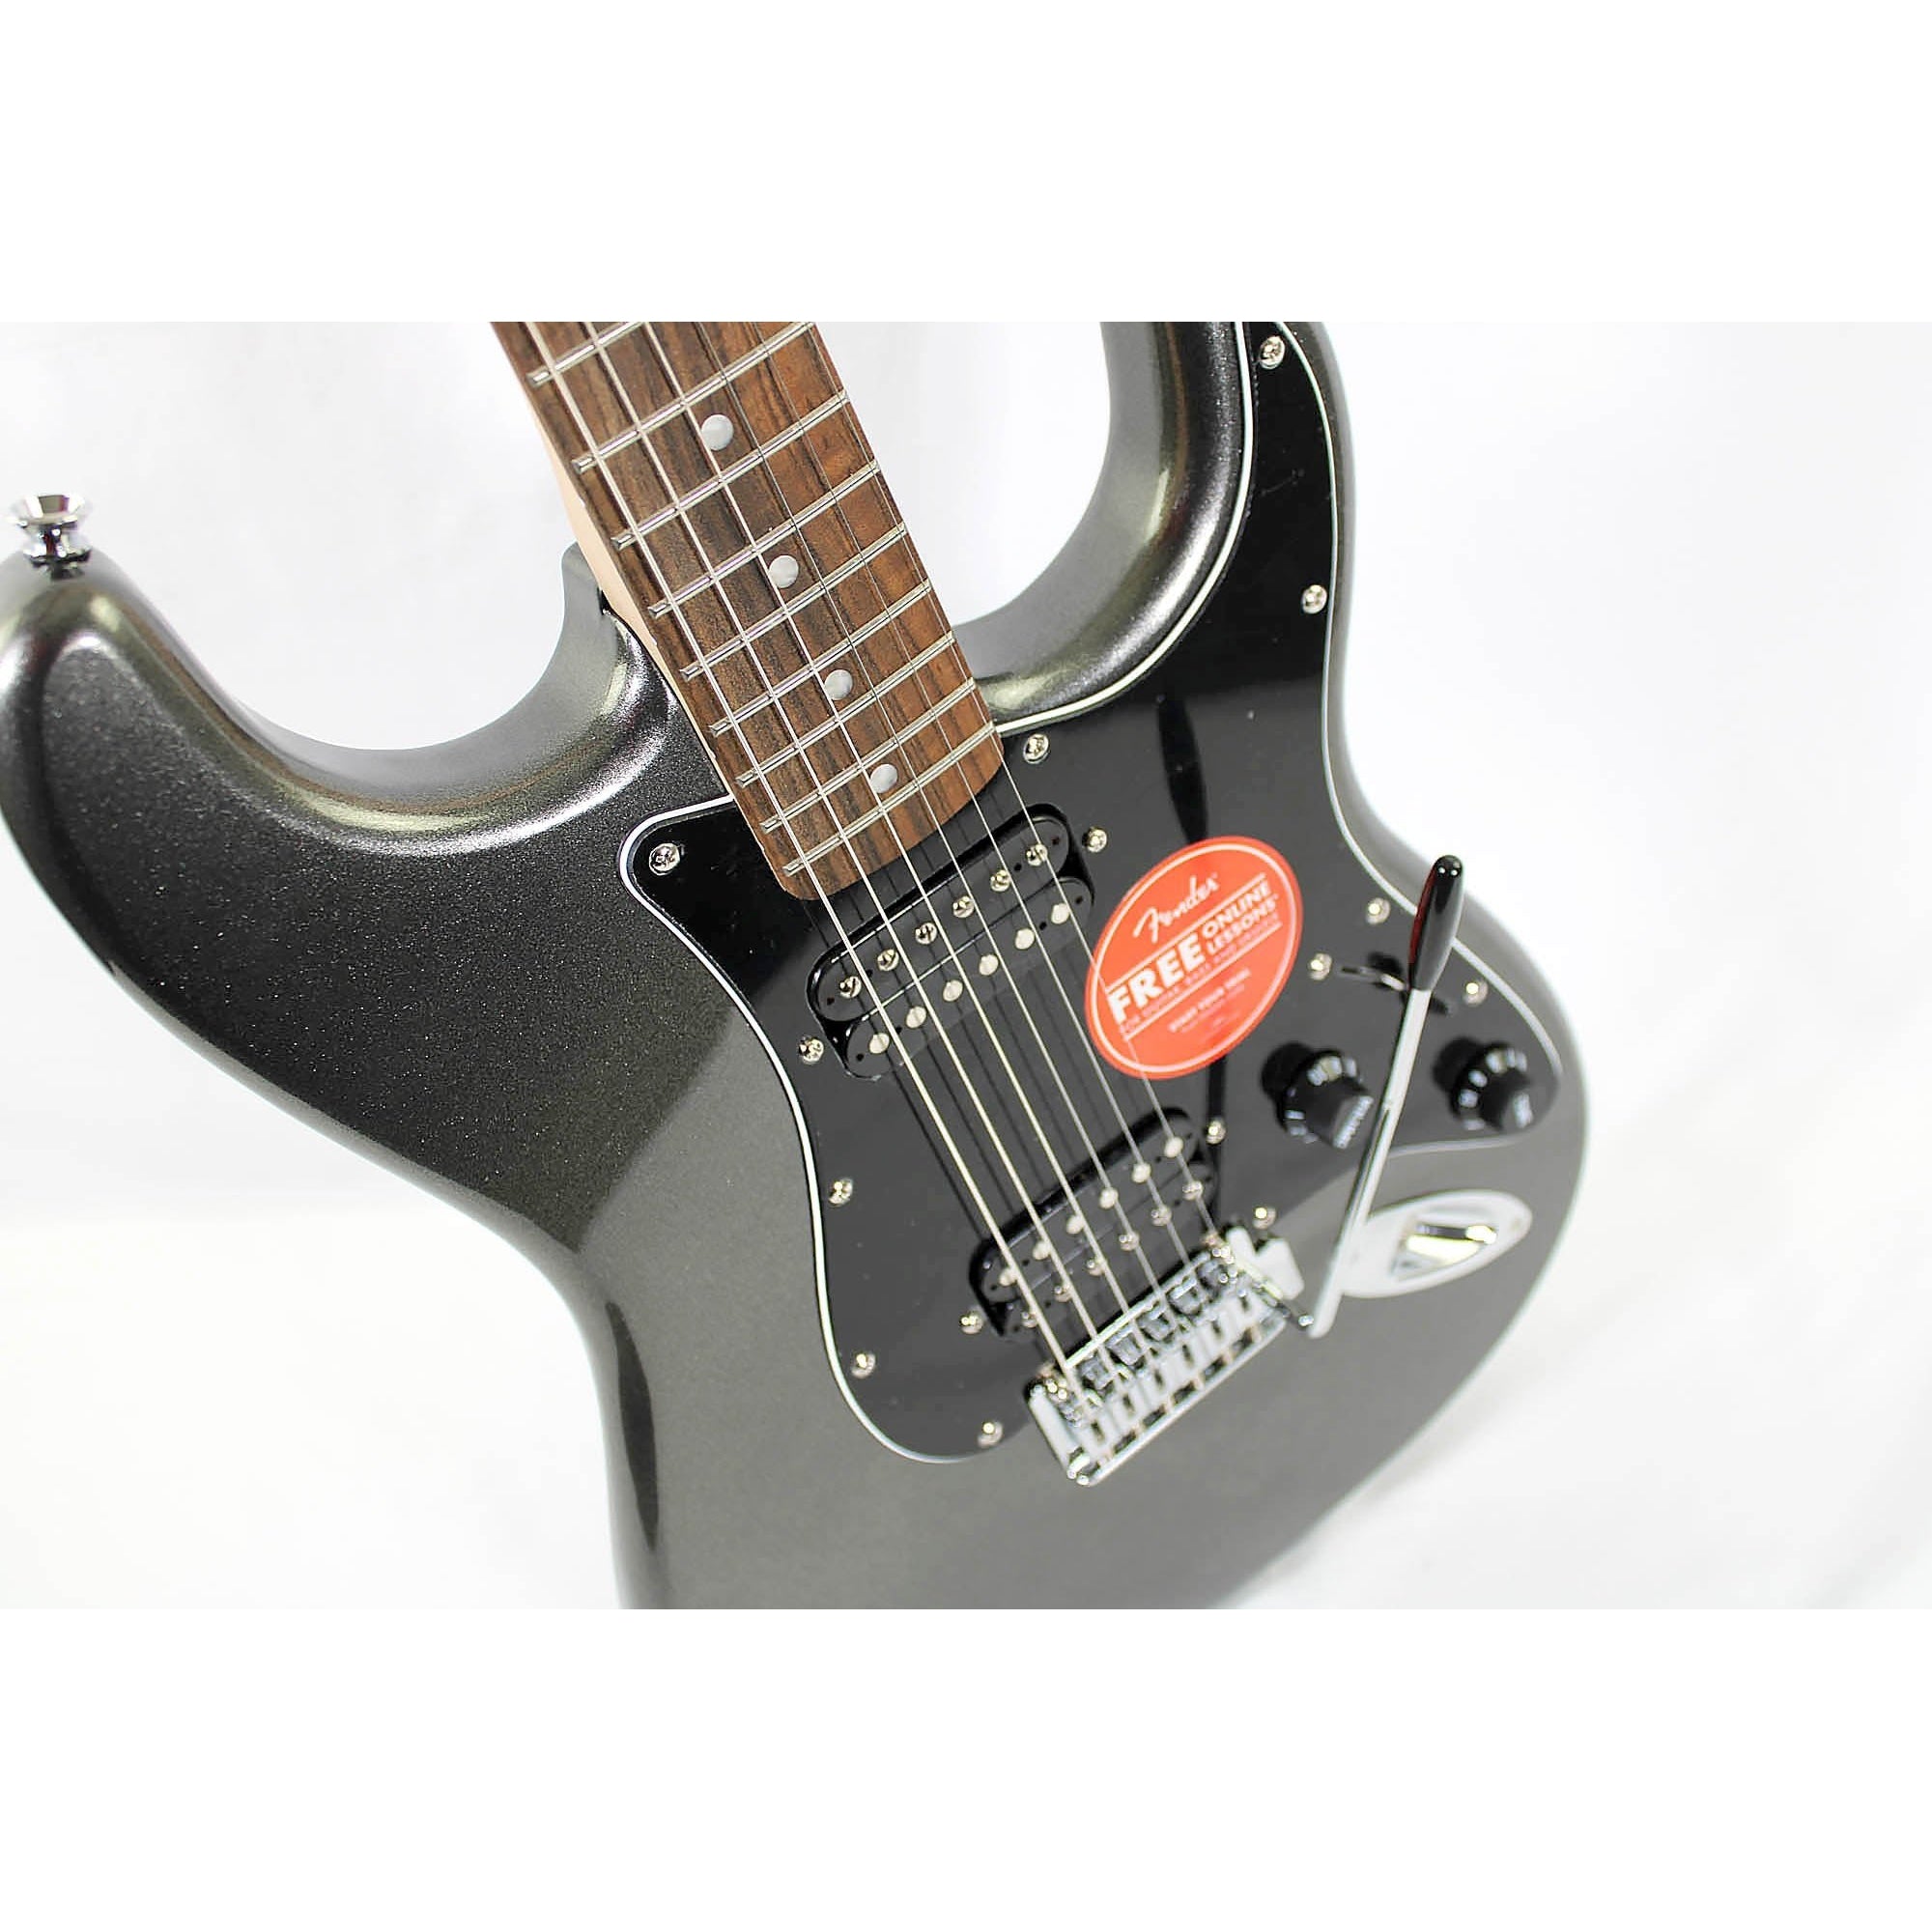 Squier Affinity Series Stratocaster - Charcoal Frost Metallic